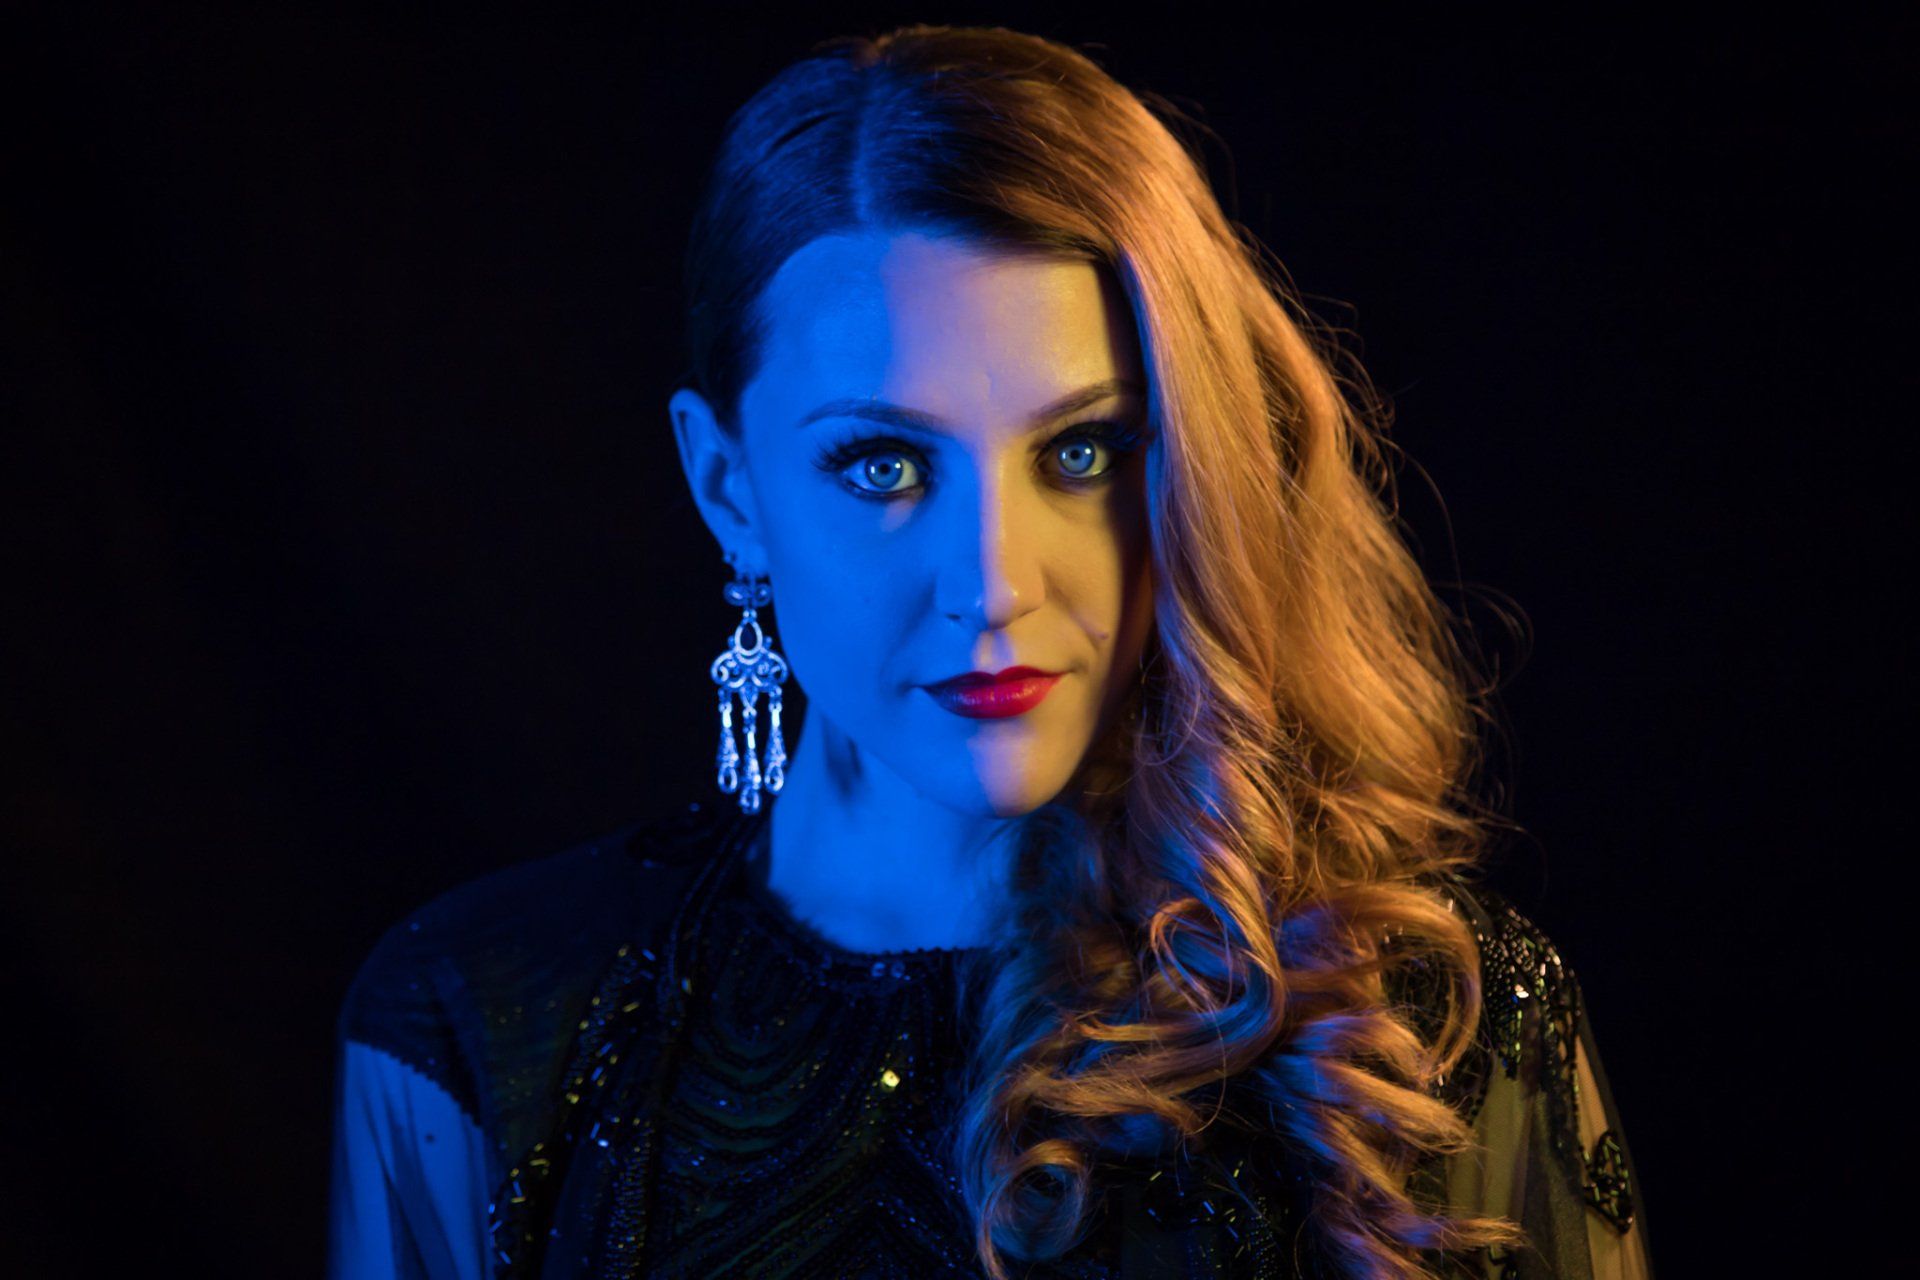 A creative colored amber and blue portrait of a woman in against a black background